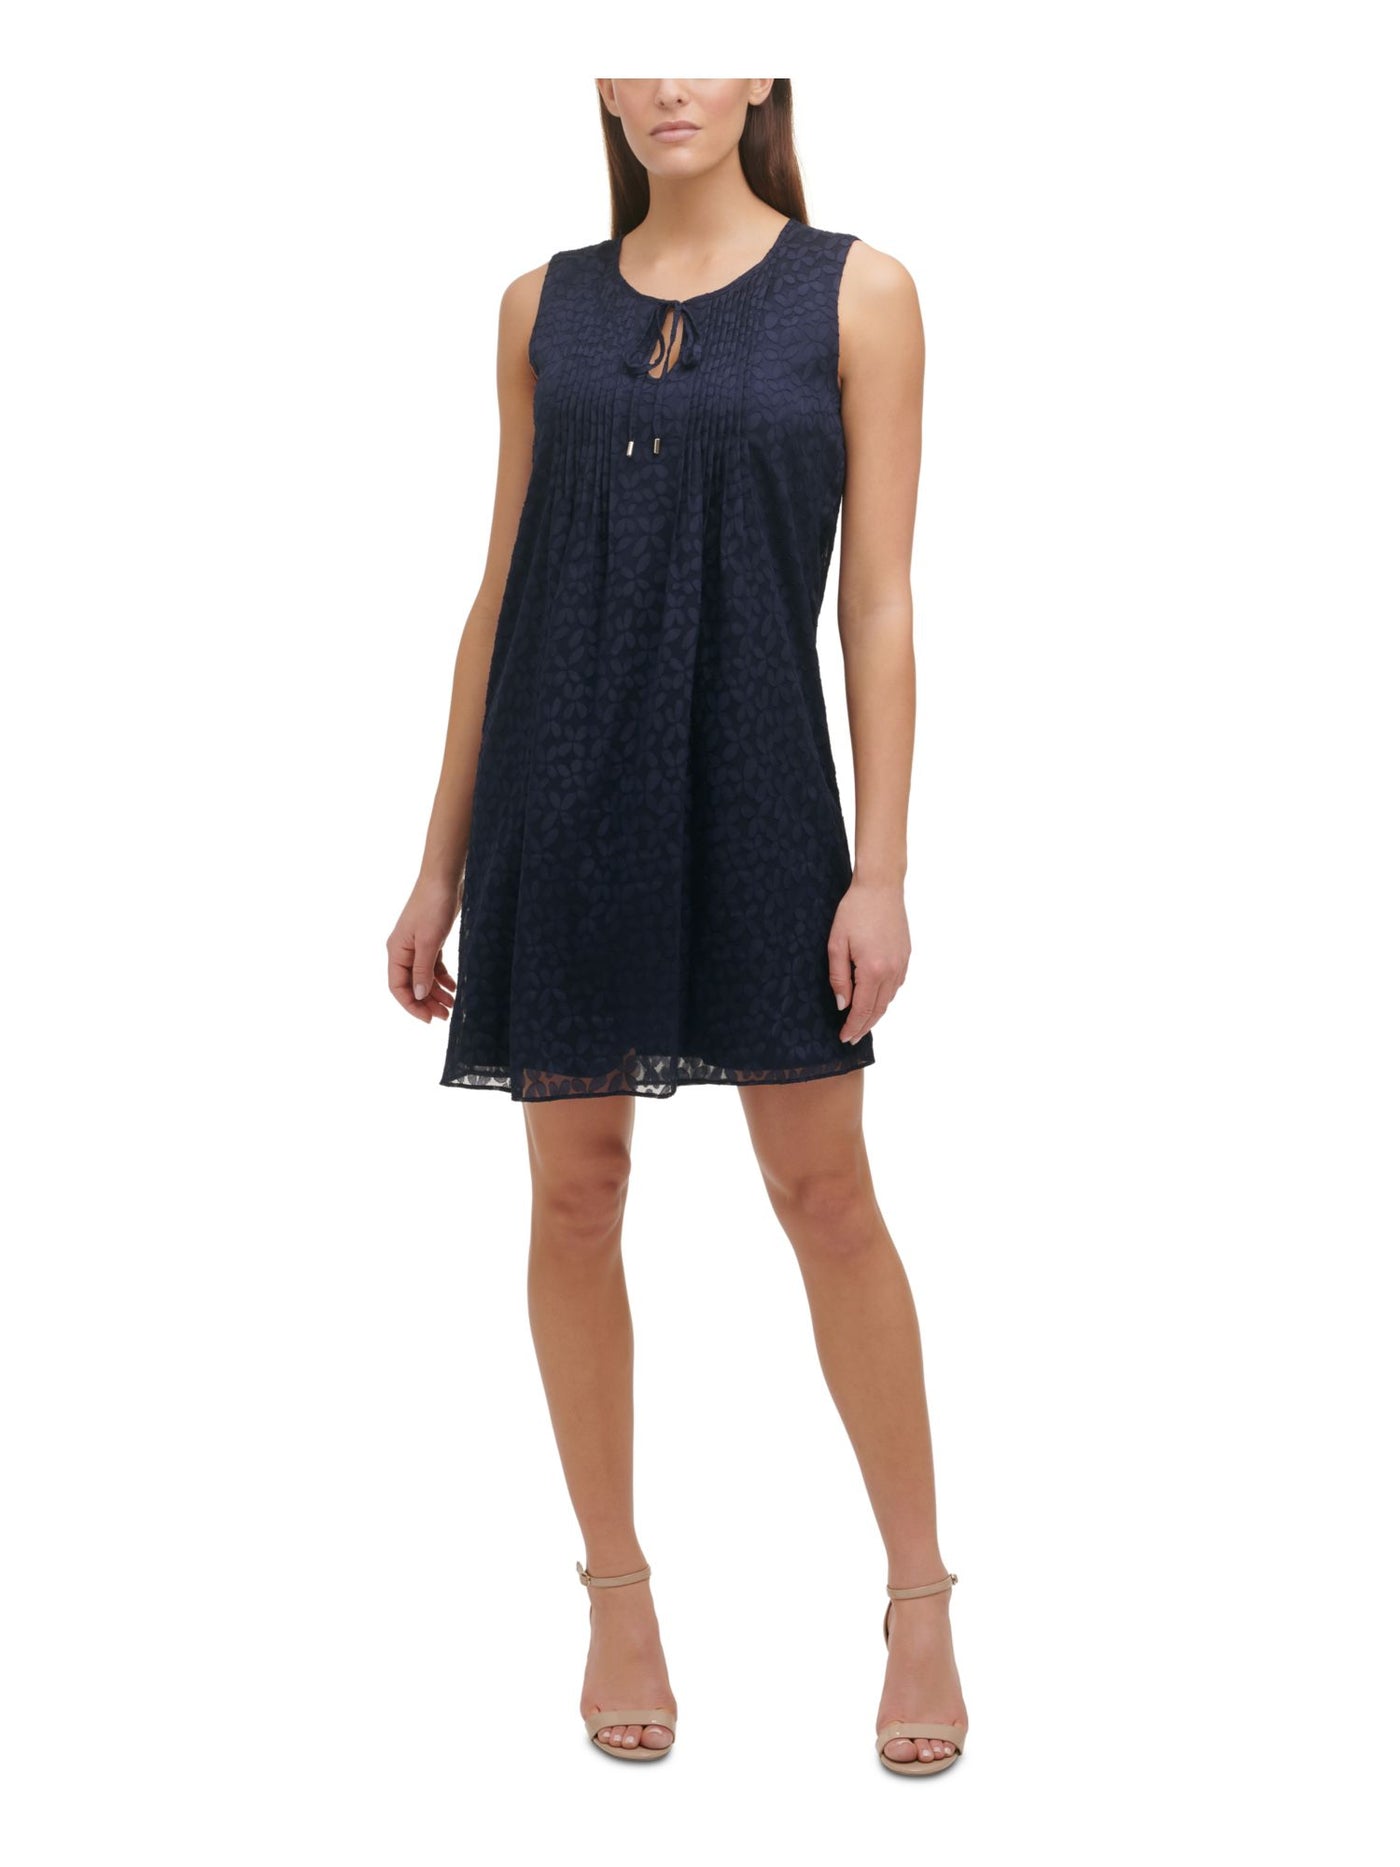 TOMMY HILFIGER Womens Navy Textured Pleated Lined Floral Sleeveless Keyhole Short Shift Dress 12